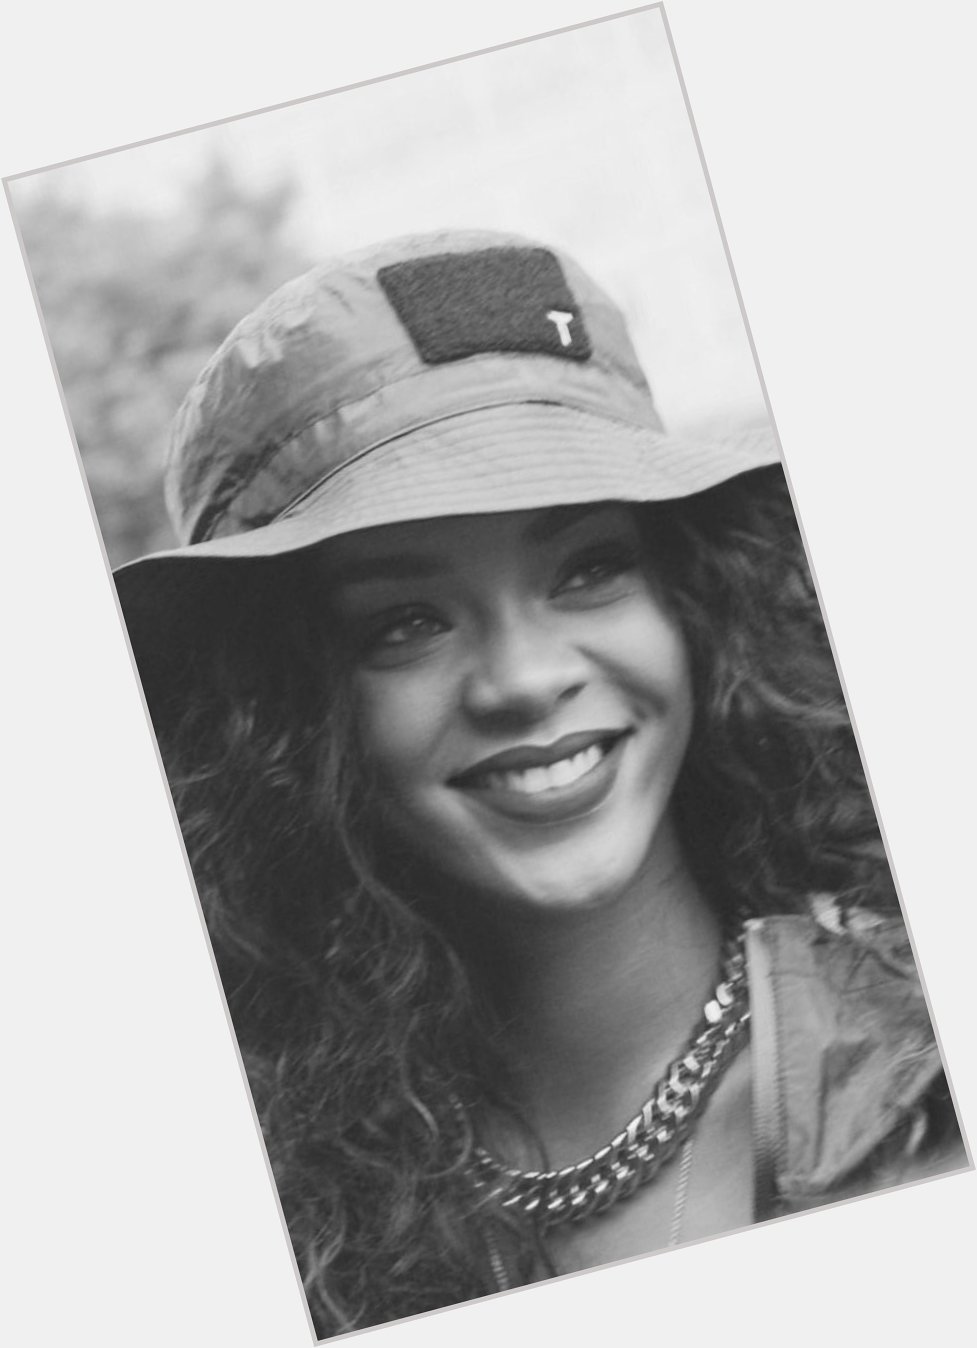  We love you a lot Rihanna happy birthday to you 